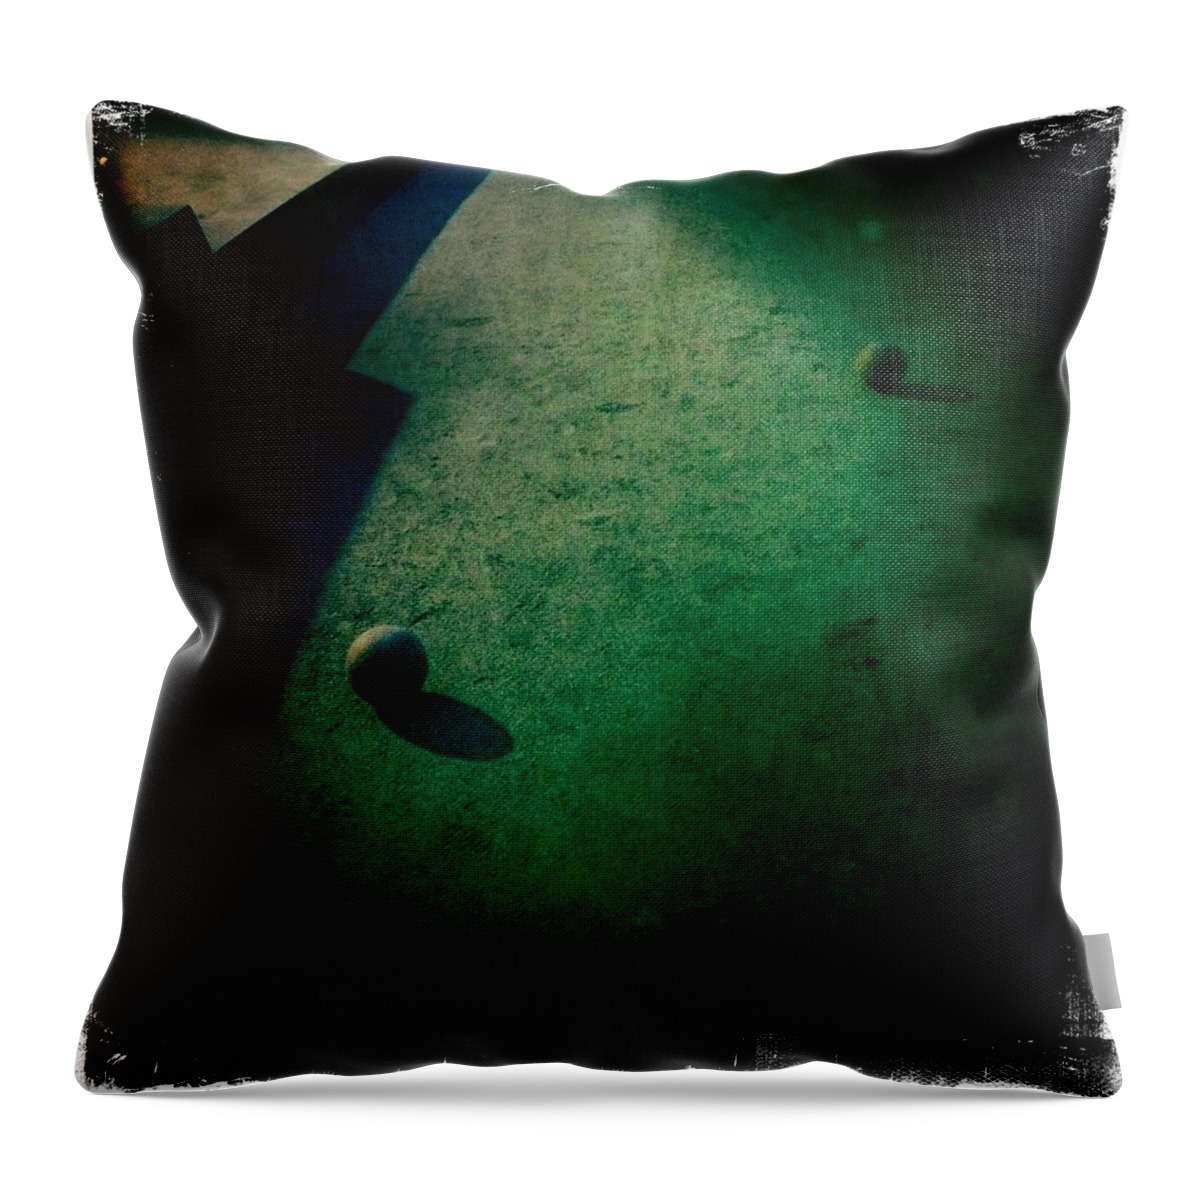 Bocce Balls Throw Pillow featuring the photograph Bocce Ball Court by Suzanne Lorenz